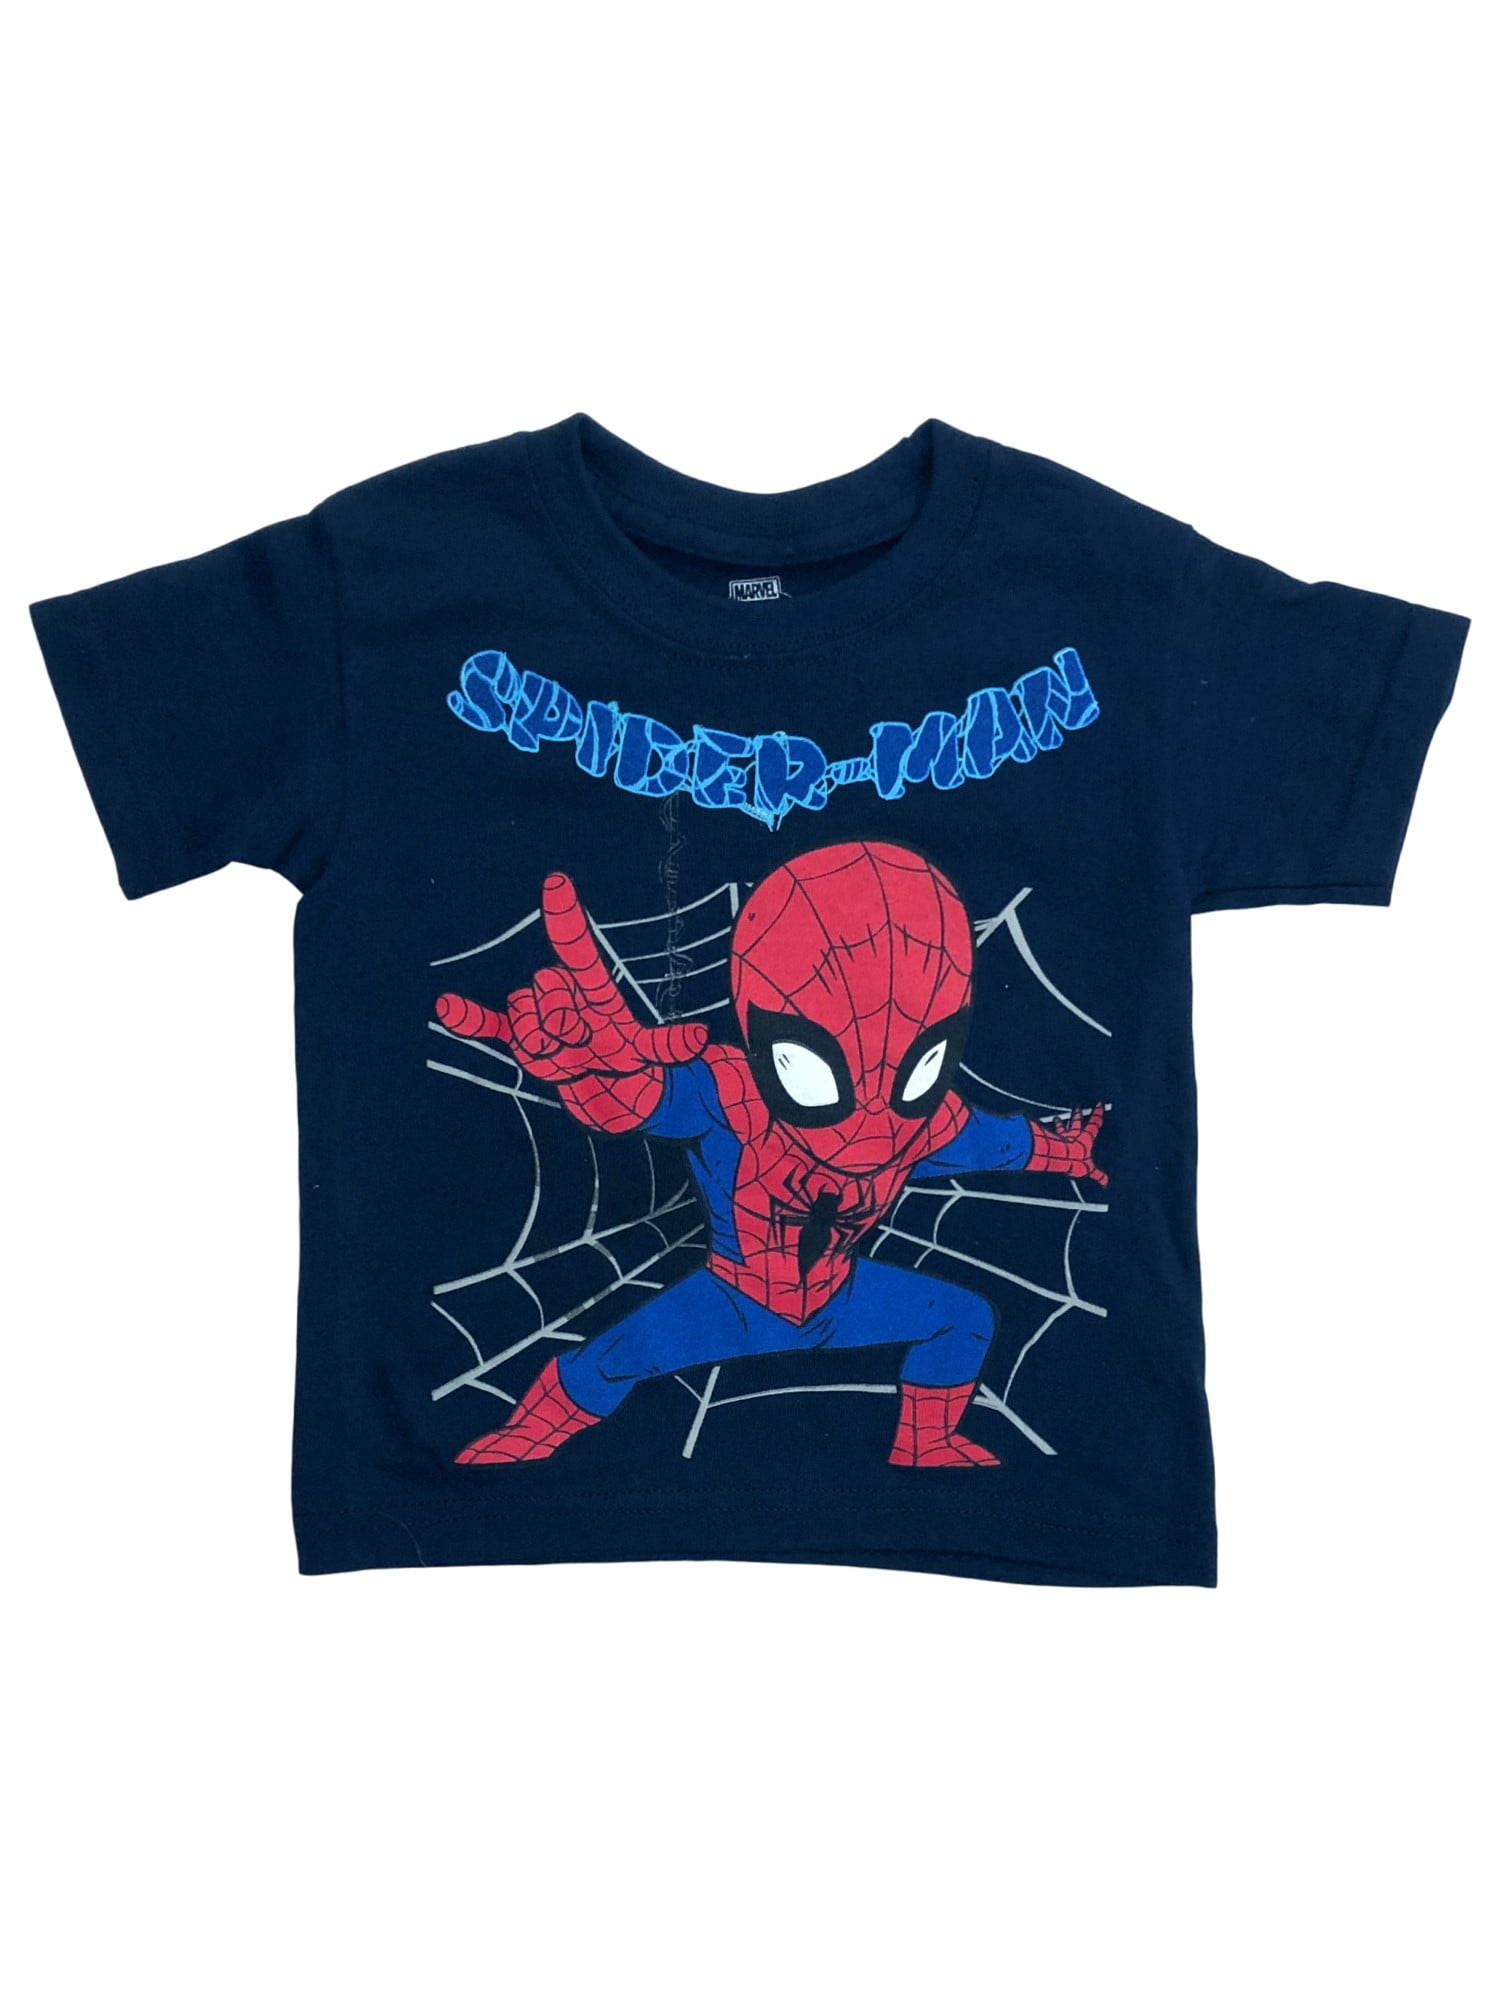 Clothing Unisex Kids Clothing Tops & Tees Dress Shirts & Button Downs Birthday Spider-man baseball jersey 